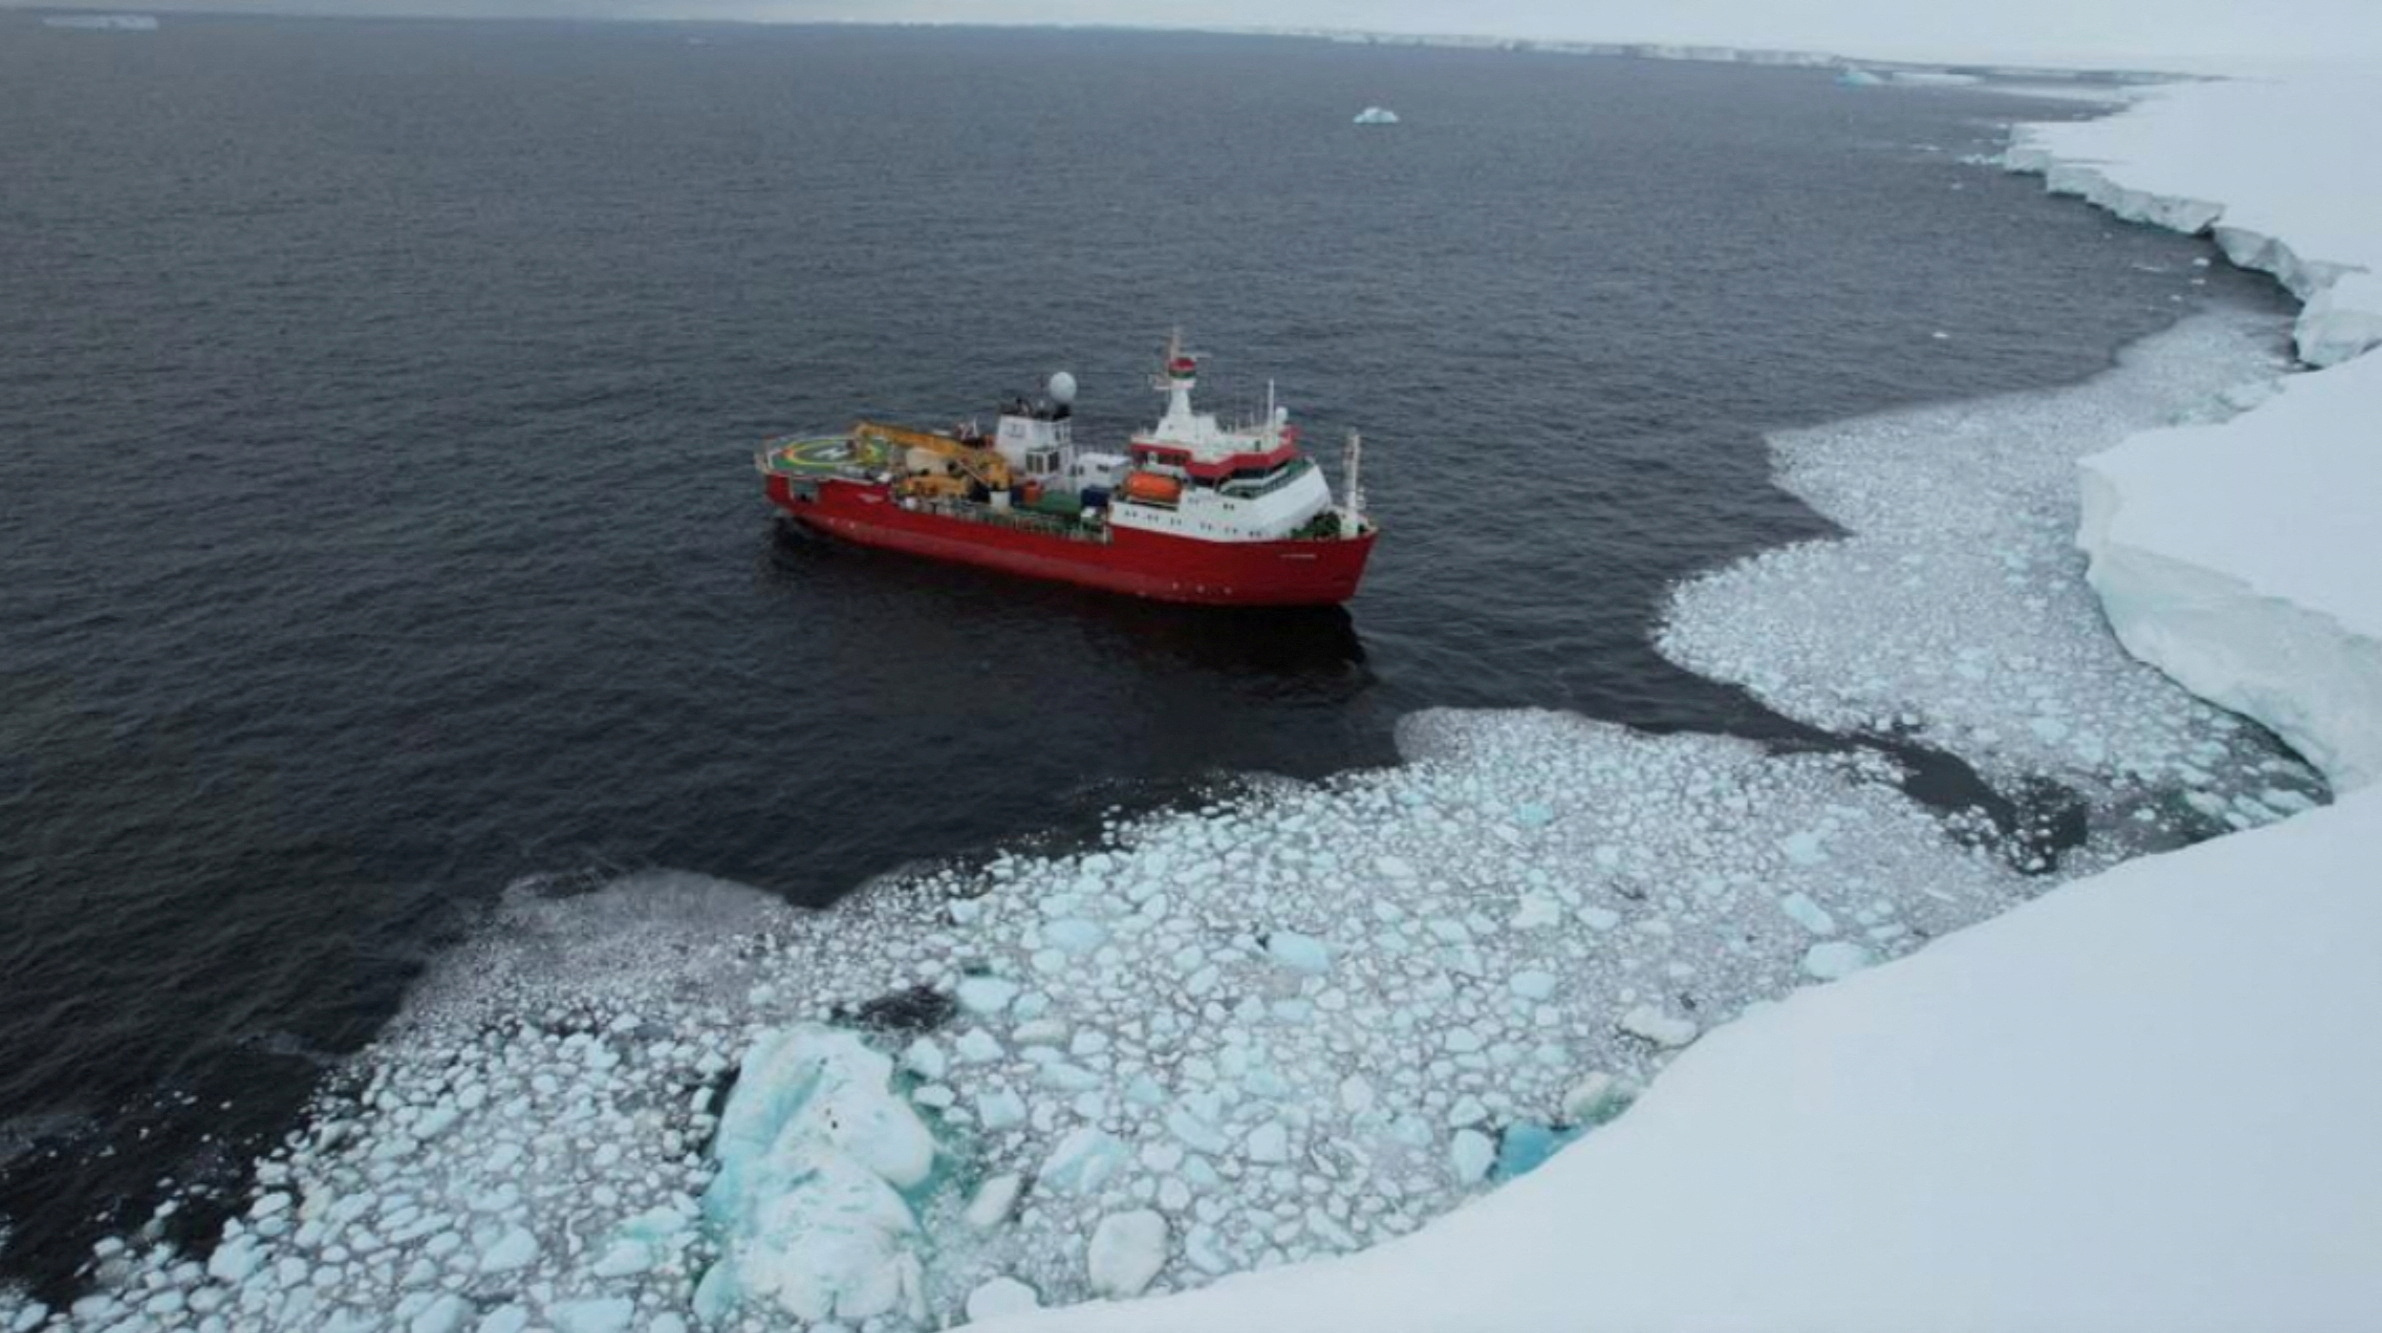 Italian ice breaker vessel Laura Bassi carrying scientists researching in the Antarctic sails near the Bay of Wales